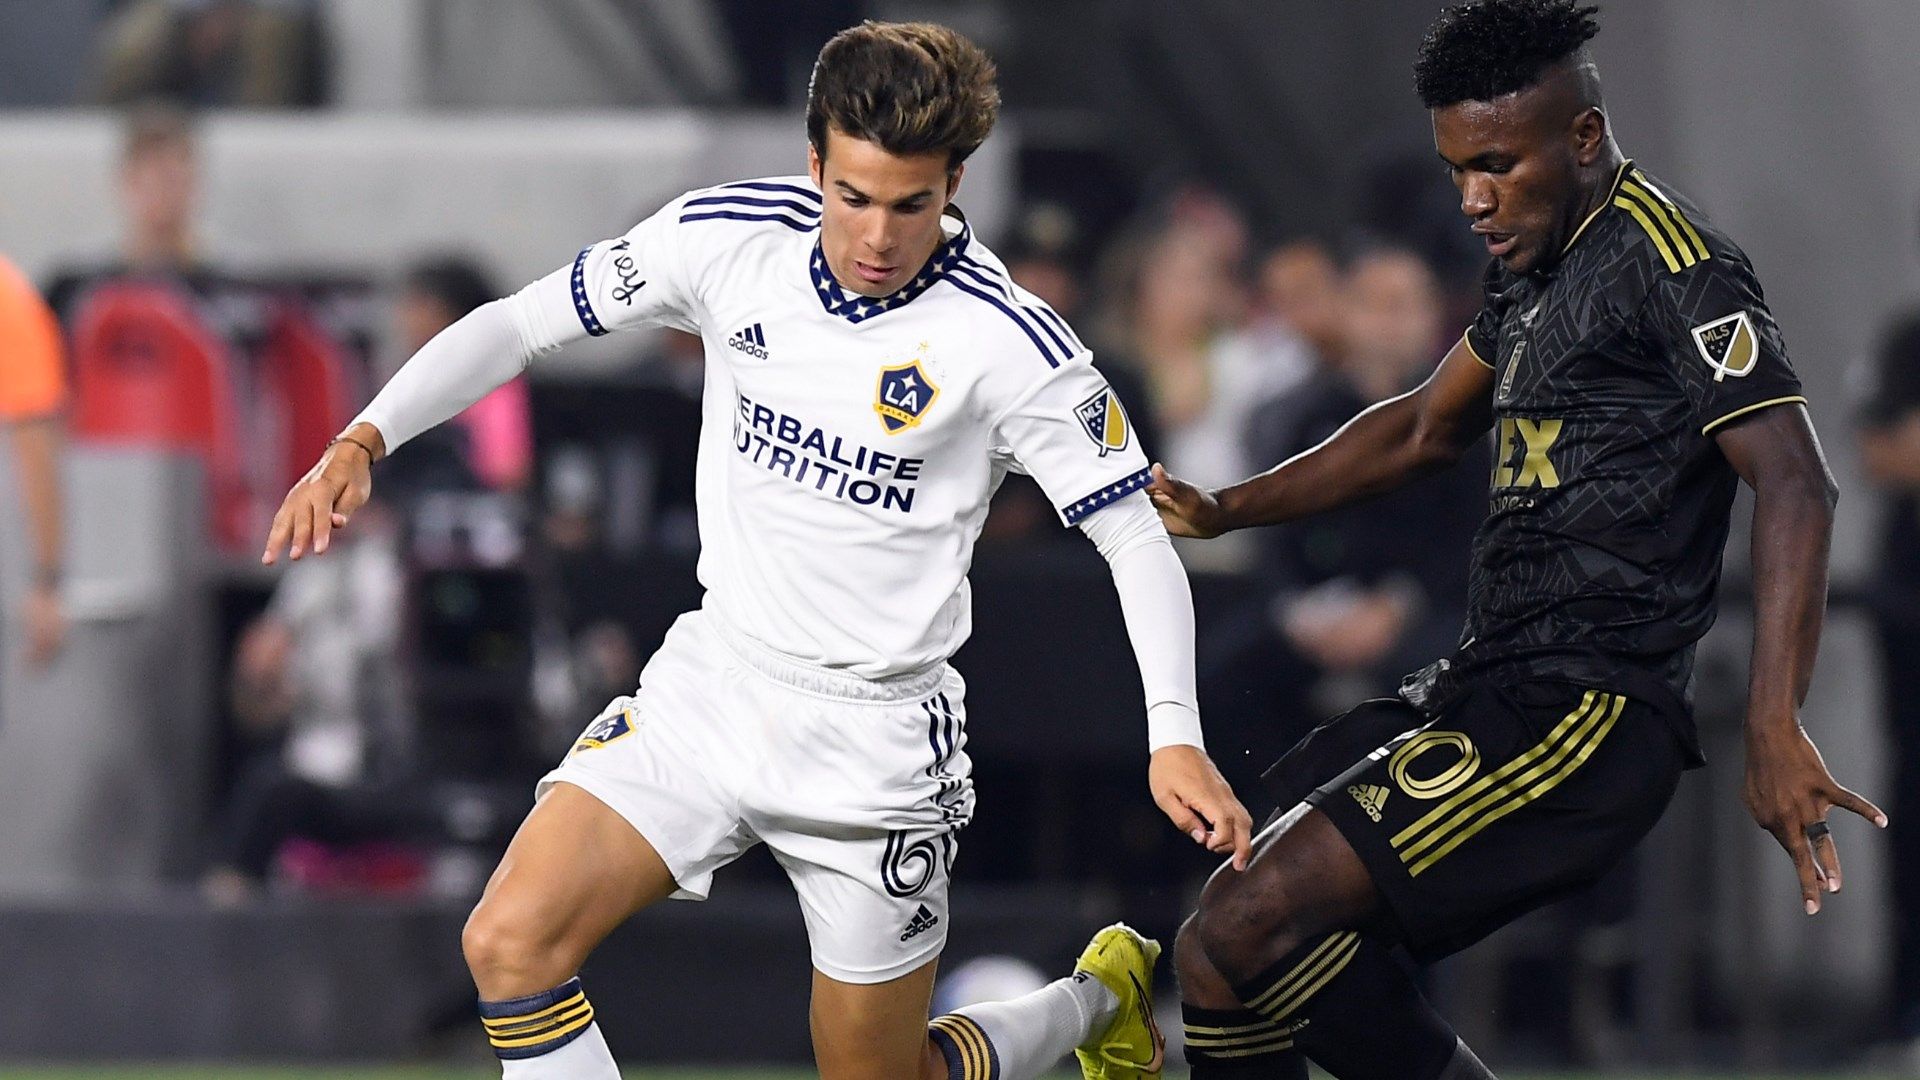 San Jose Earthquakes vs LA Galaxy: Live stream, TV channel, kick-off time and where to watch